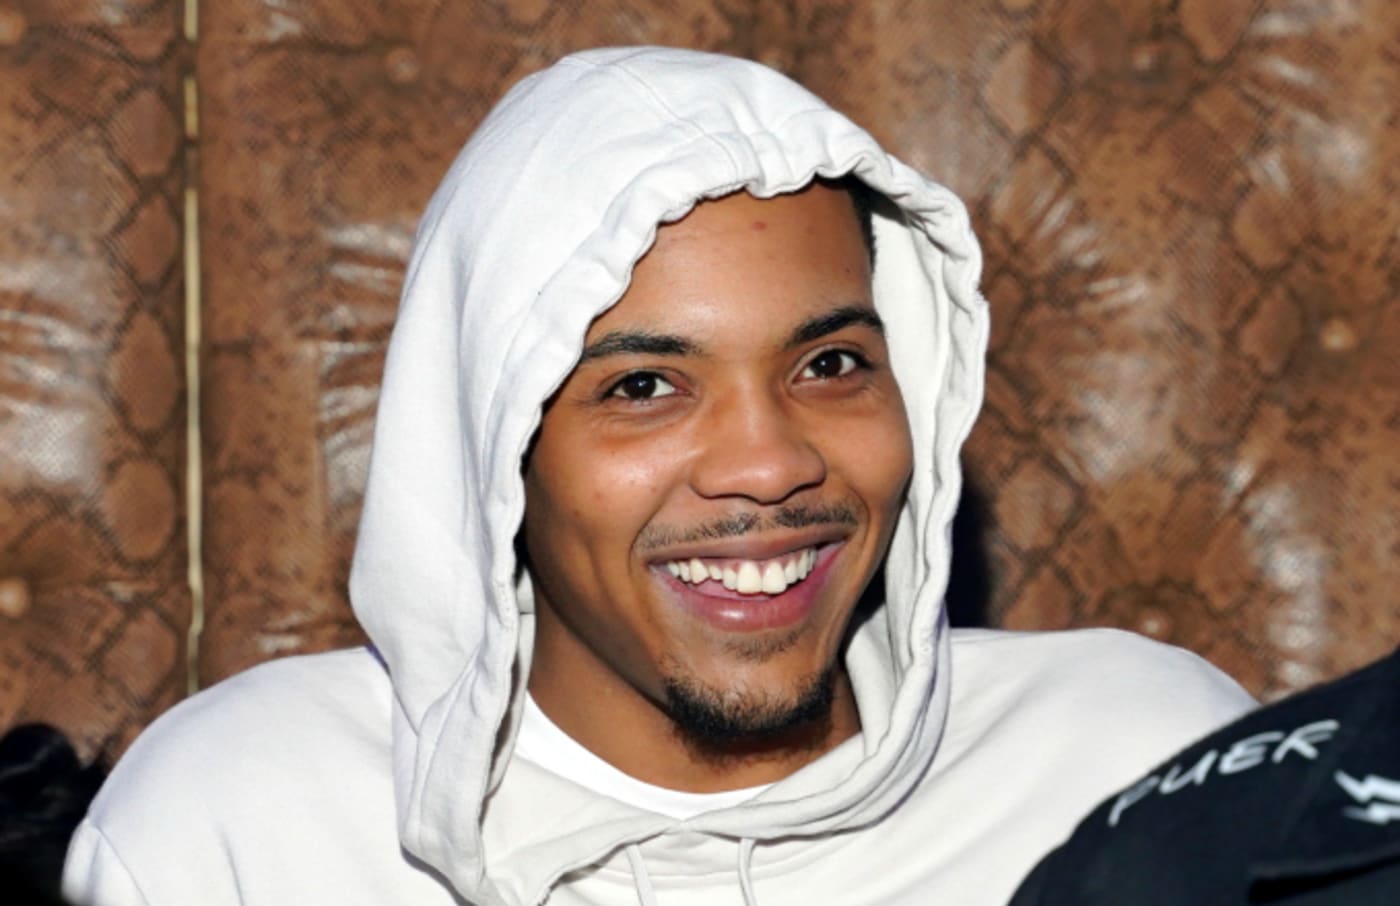 Rapper G Herbo attends a Party at Allure